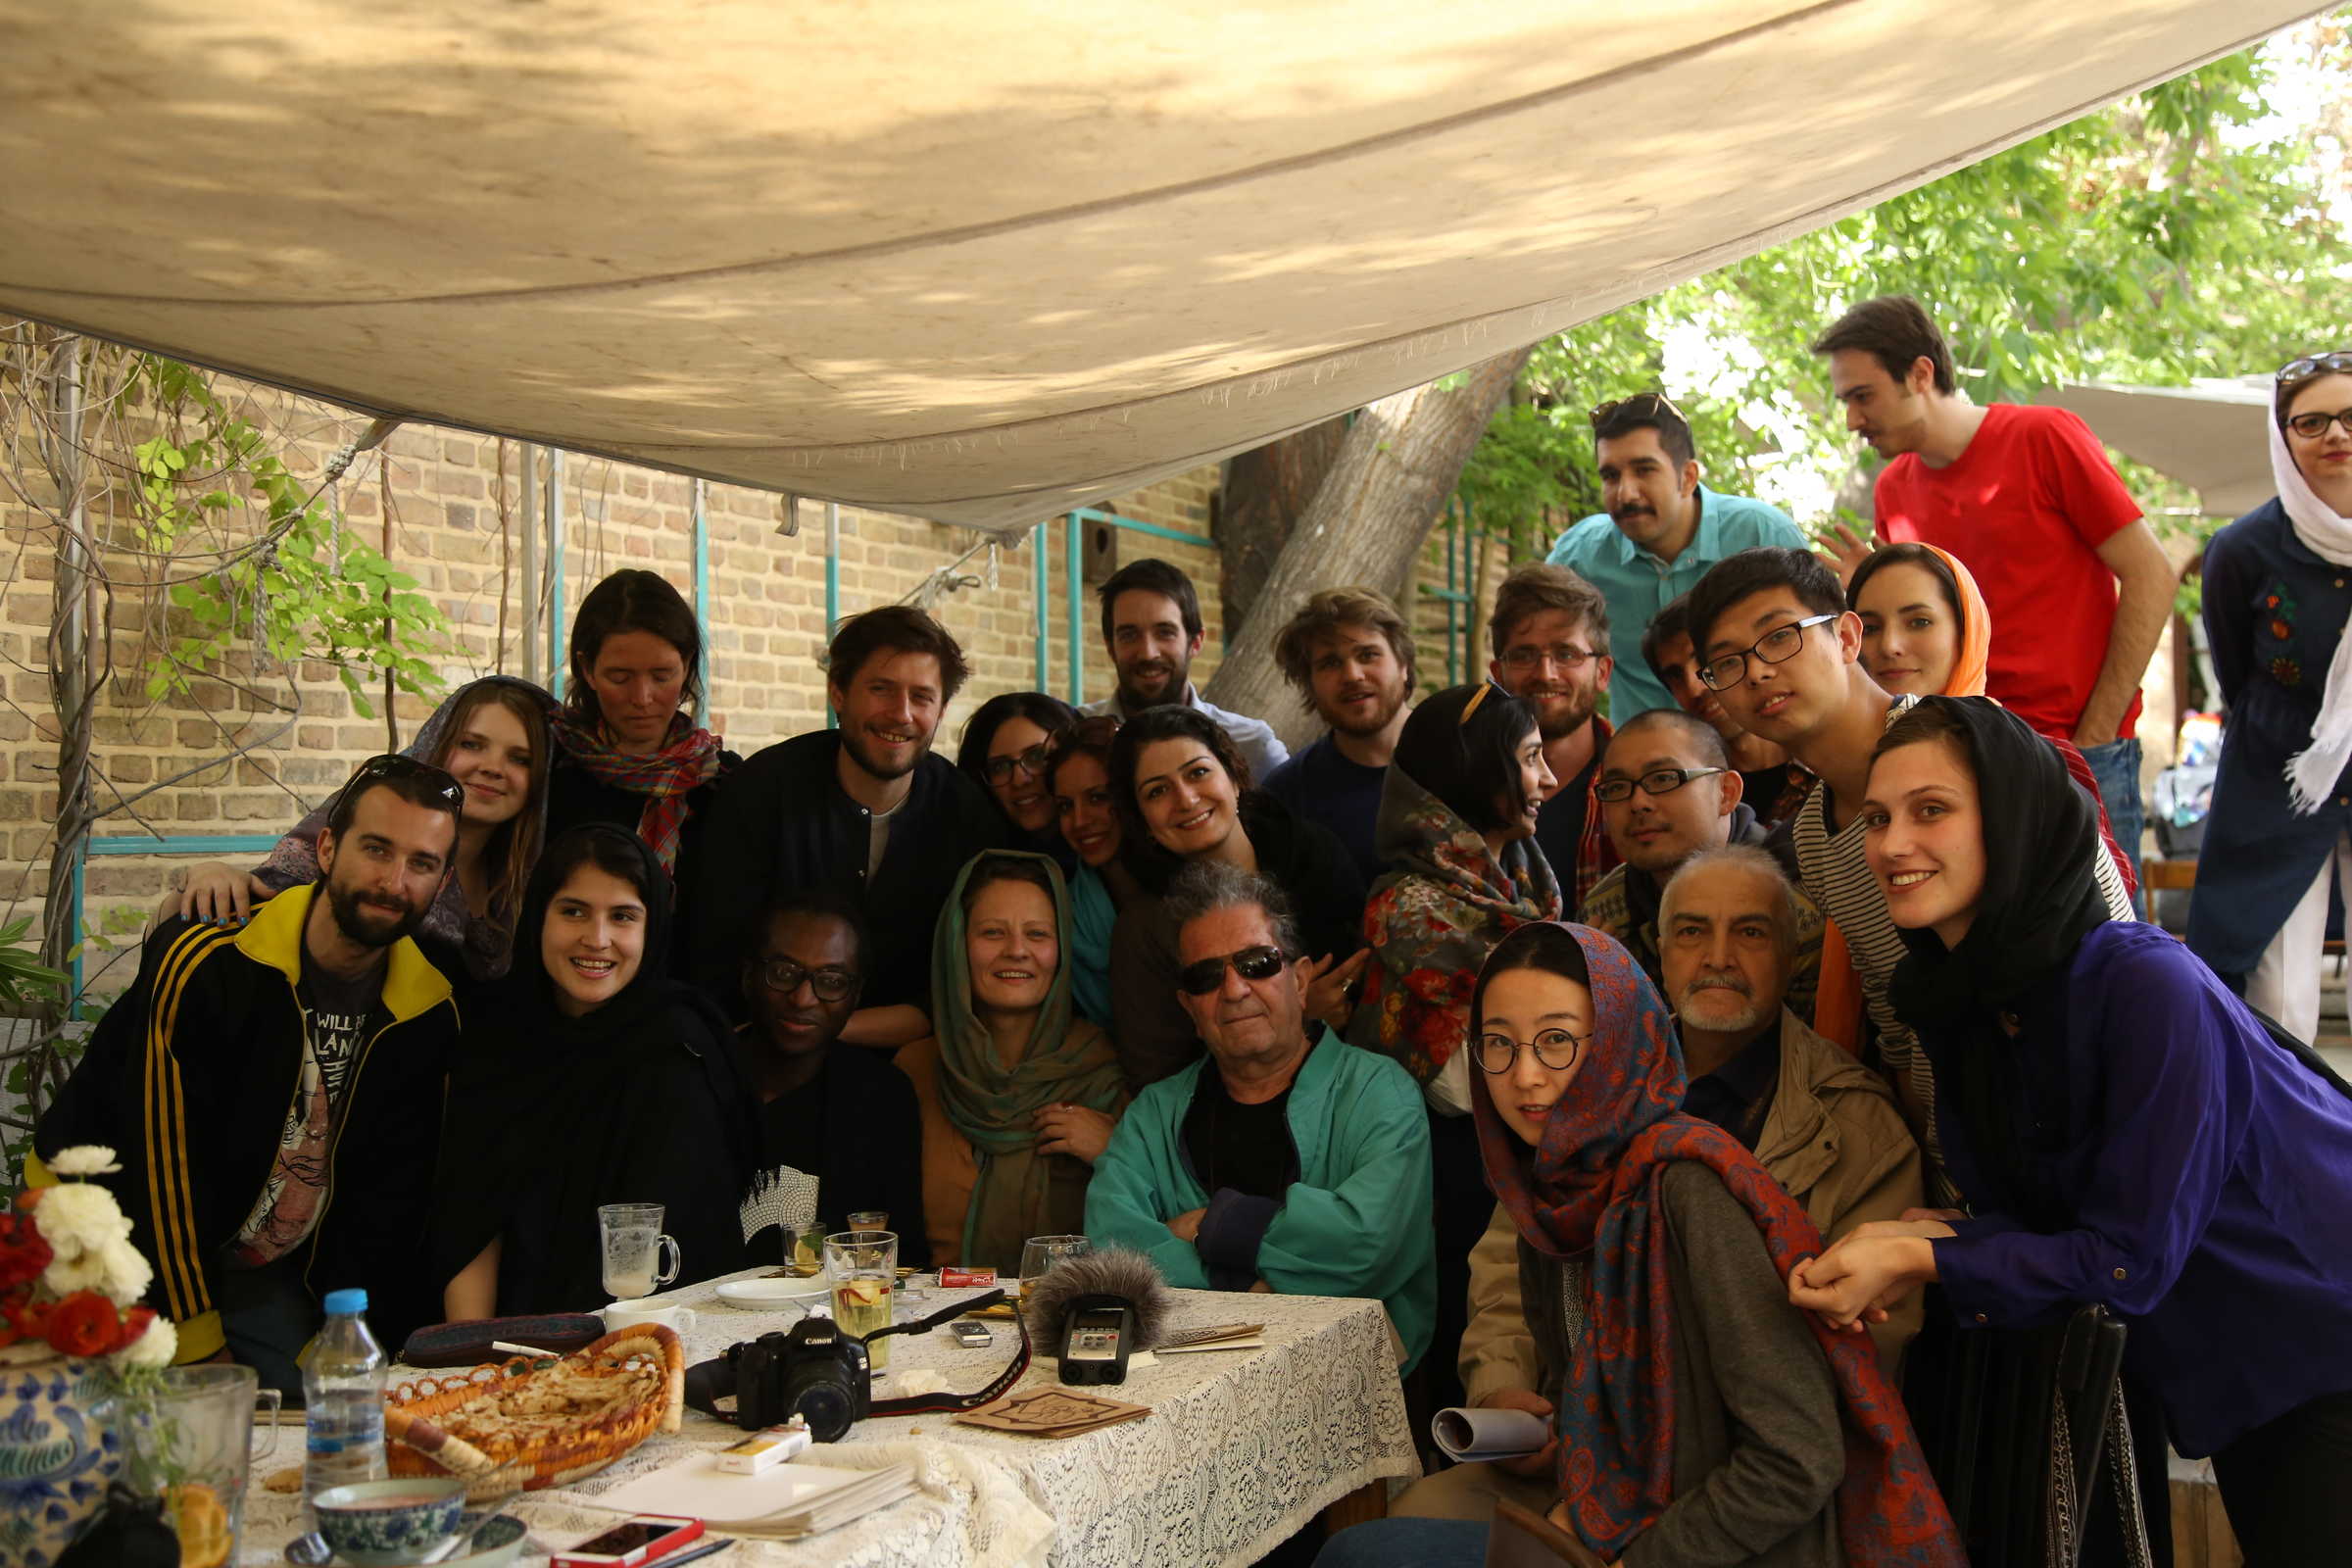 Roaming Academy - Tehran Group portrait. Fred Cave is standing in the middle of the back row,